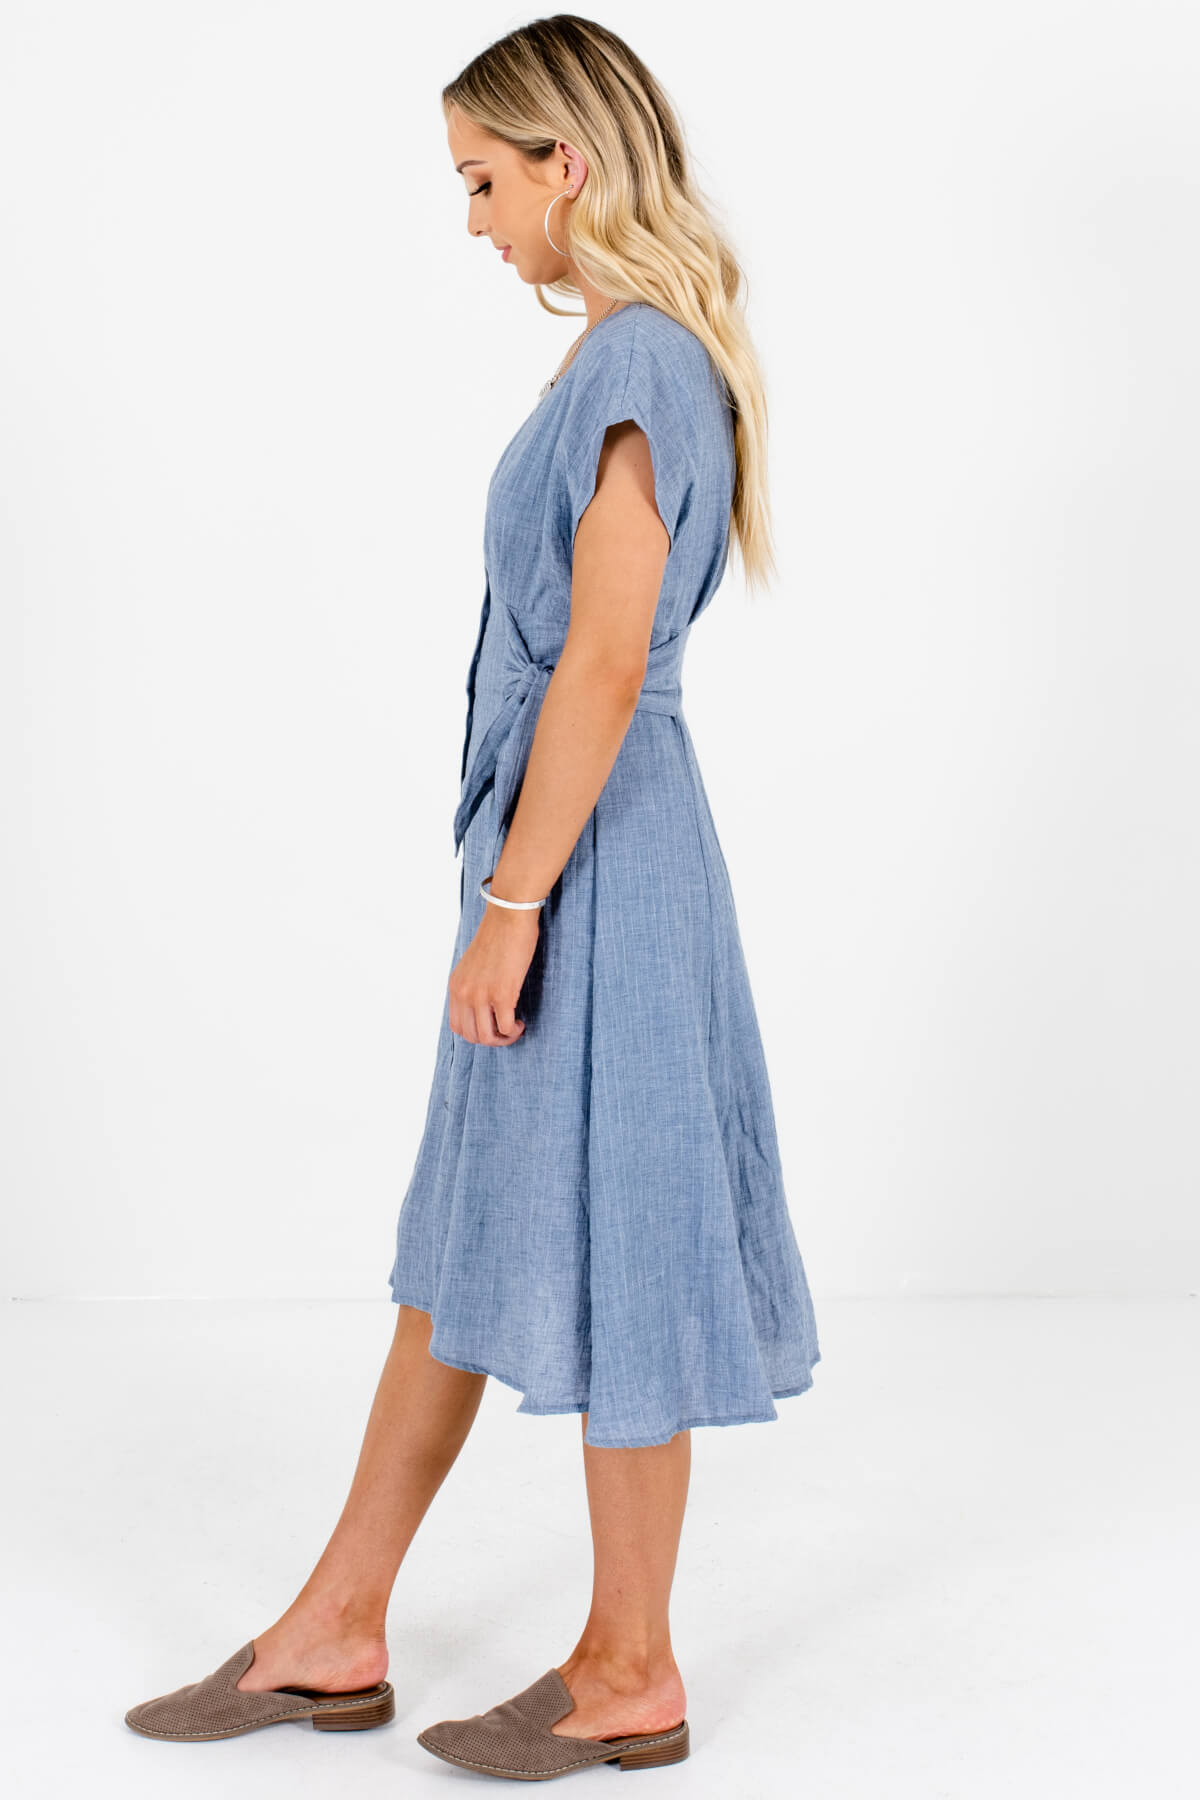 Blue Button-Up Midi Dresses with Side-Tie Details